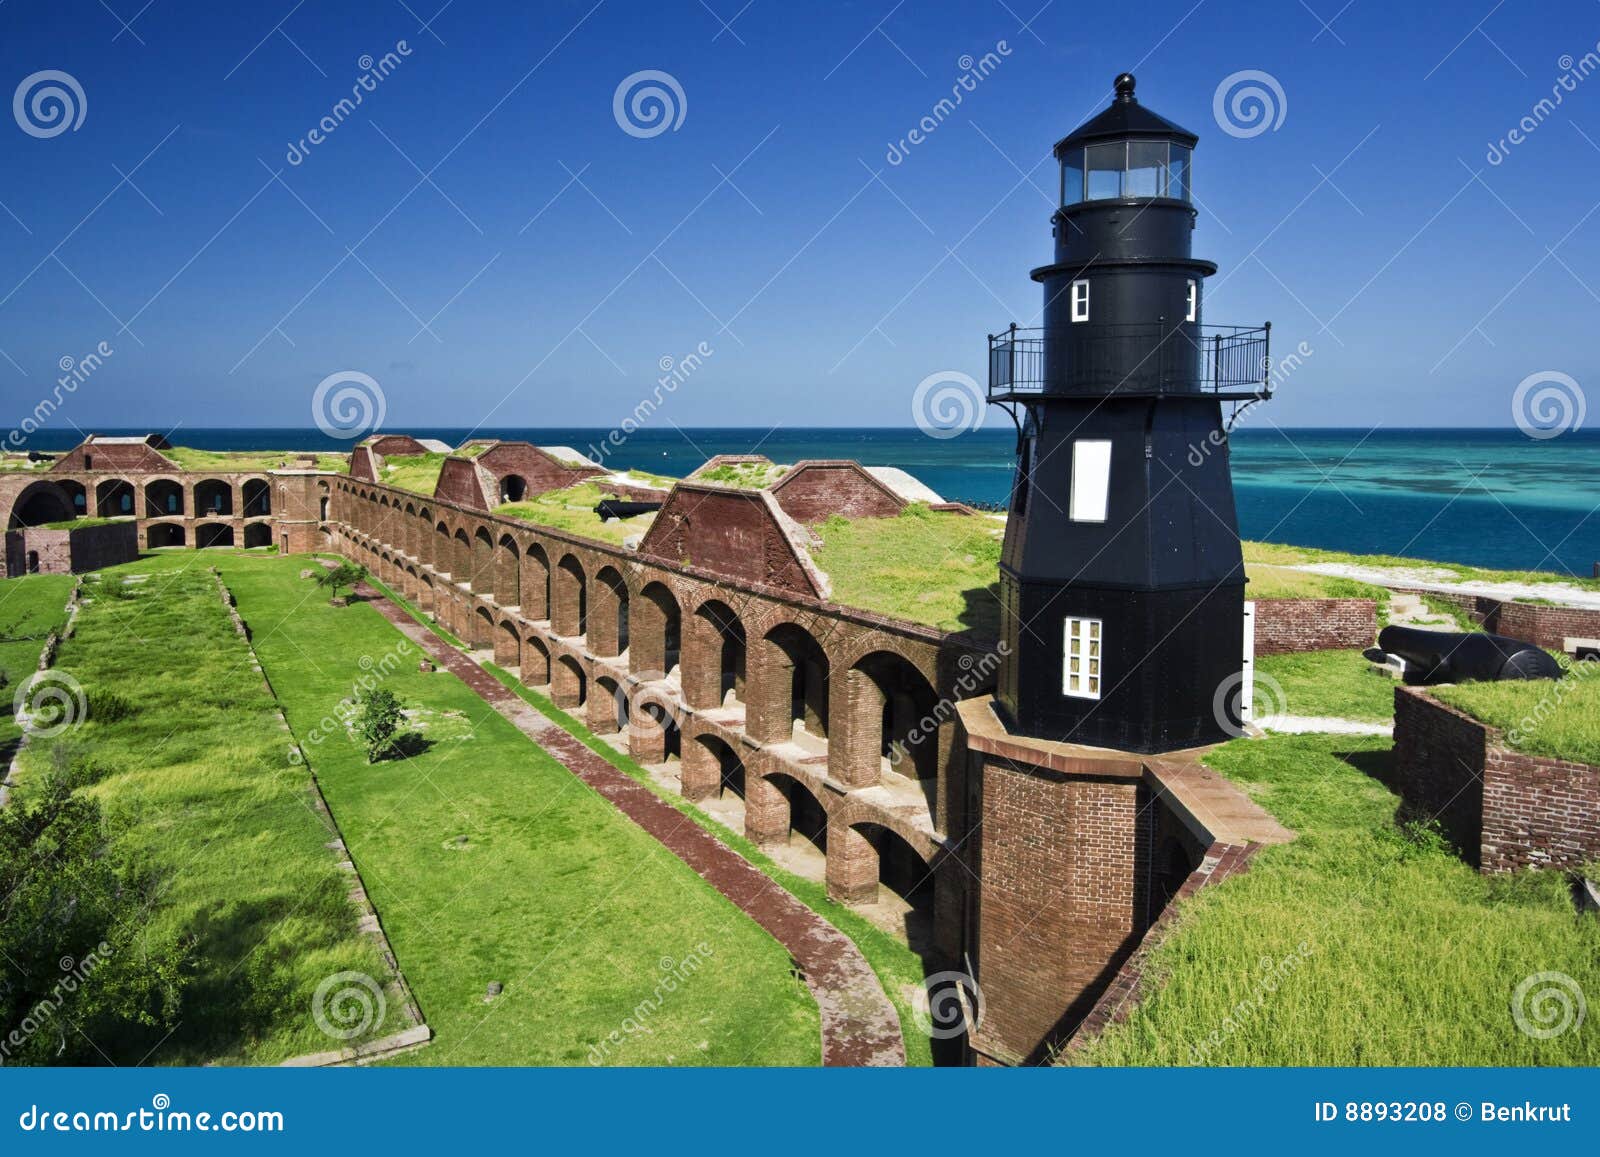 lighthouse - a part of dry tortugas national park.